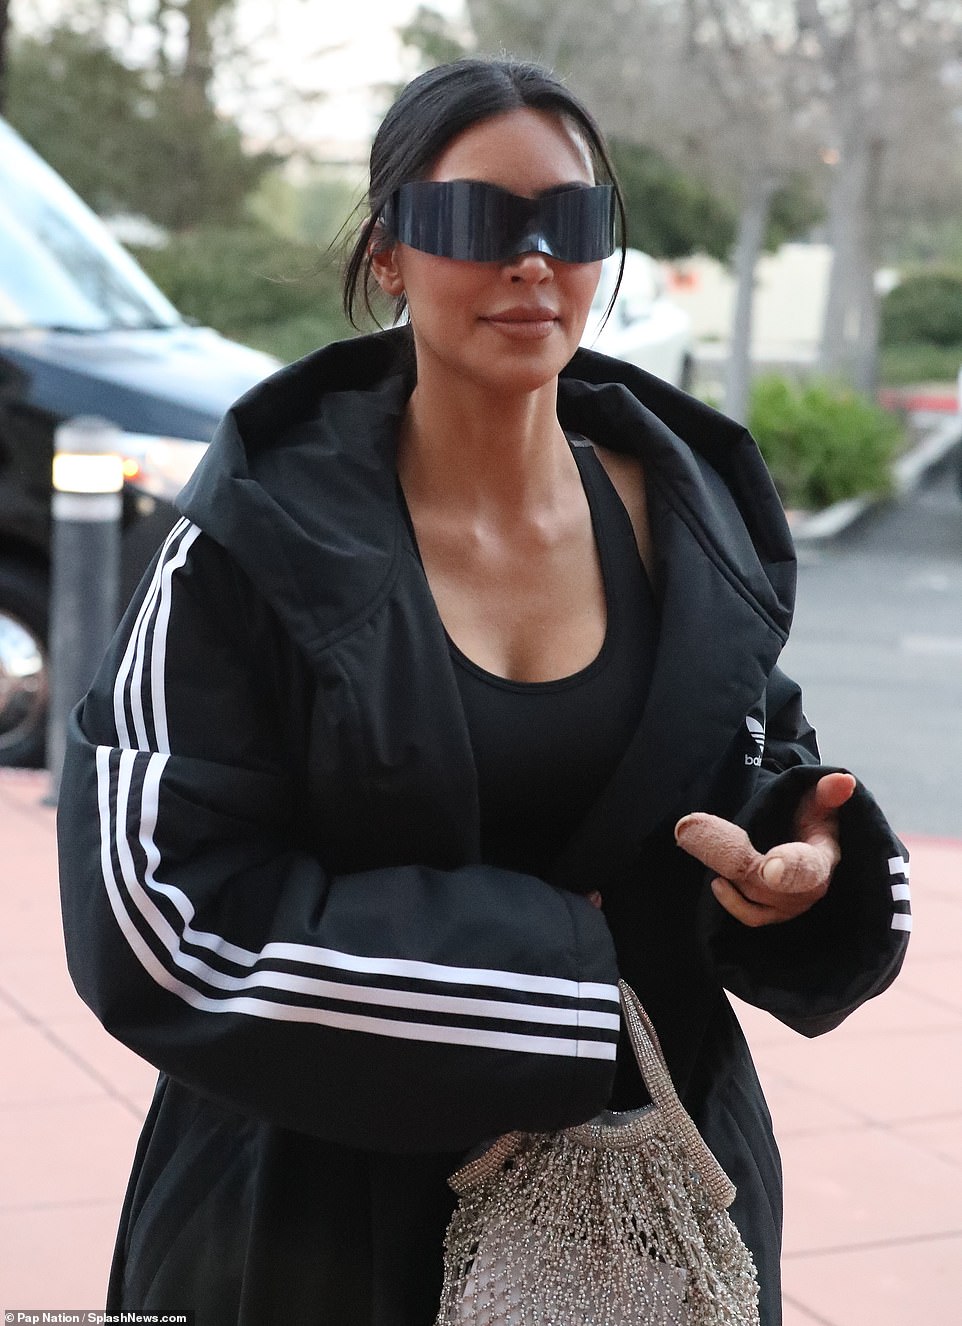 Kim turned heads when she arrived at the Calabasas sports complex.